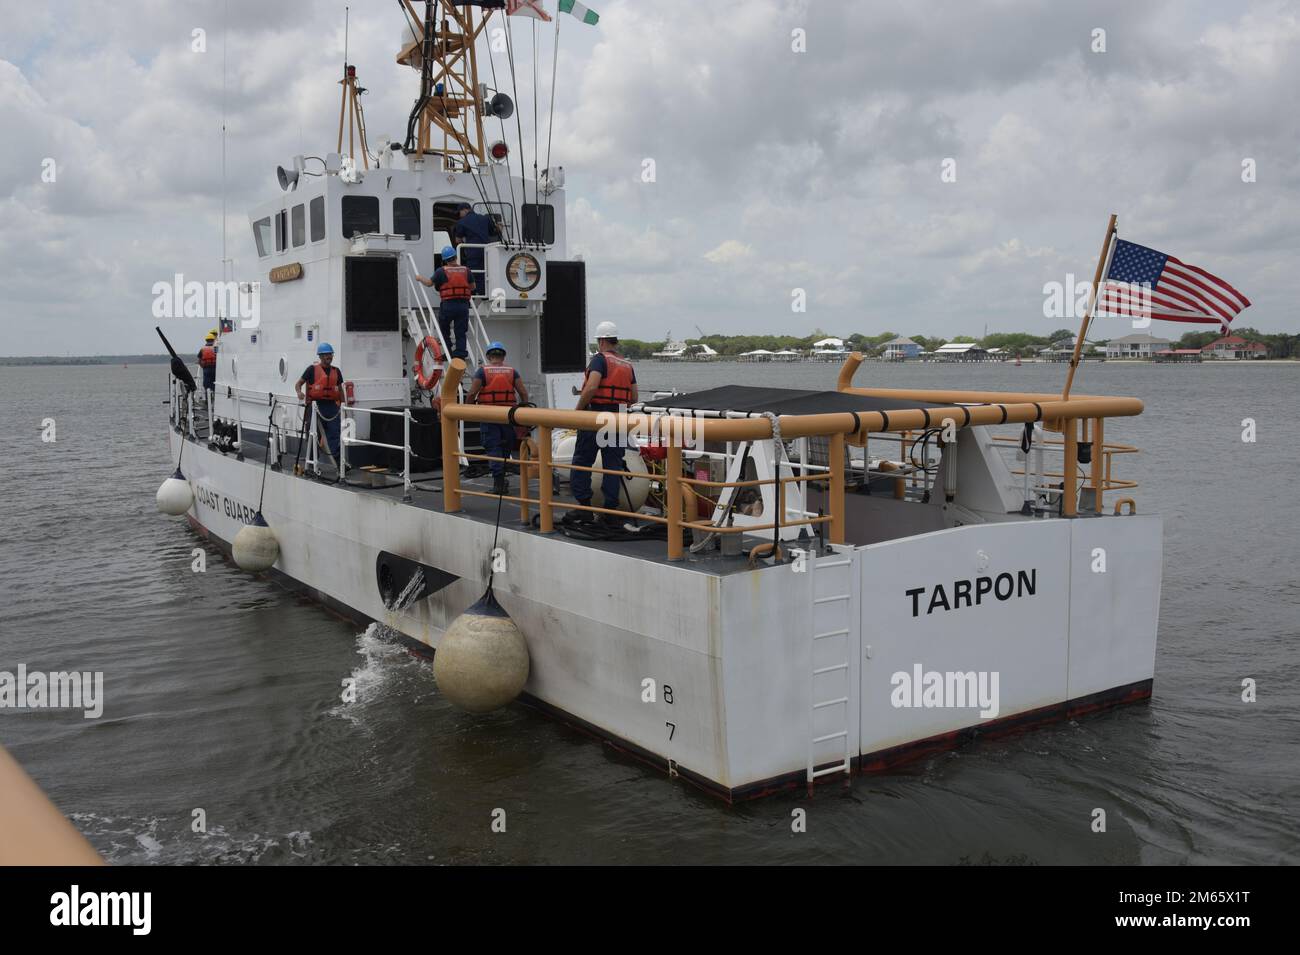 U.S. Coast Guardsmen assigned to the coastal patrol boat USCGC Tarpon (WPB 87310), get underway from Coast Guard Sector Jacksonville, Florida, April 5, 2022. The Tarpon is an 87-foot marine-protector class patrol boat capable of performing search and rescue, law enforcement, fishery patrols, drug interdiction, illegal immigrant interdiction and homeland security duties up to 200 nautical miles offshore. Stock Photo